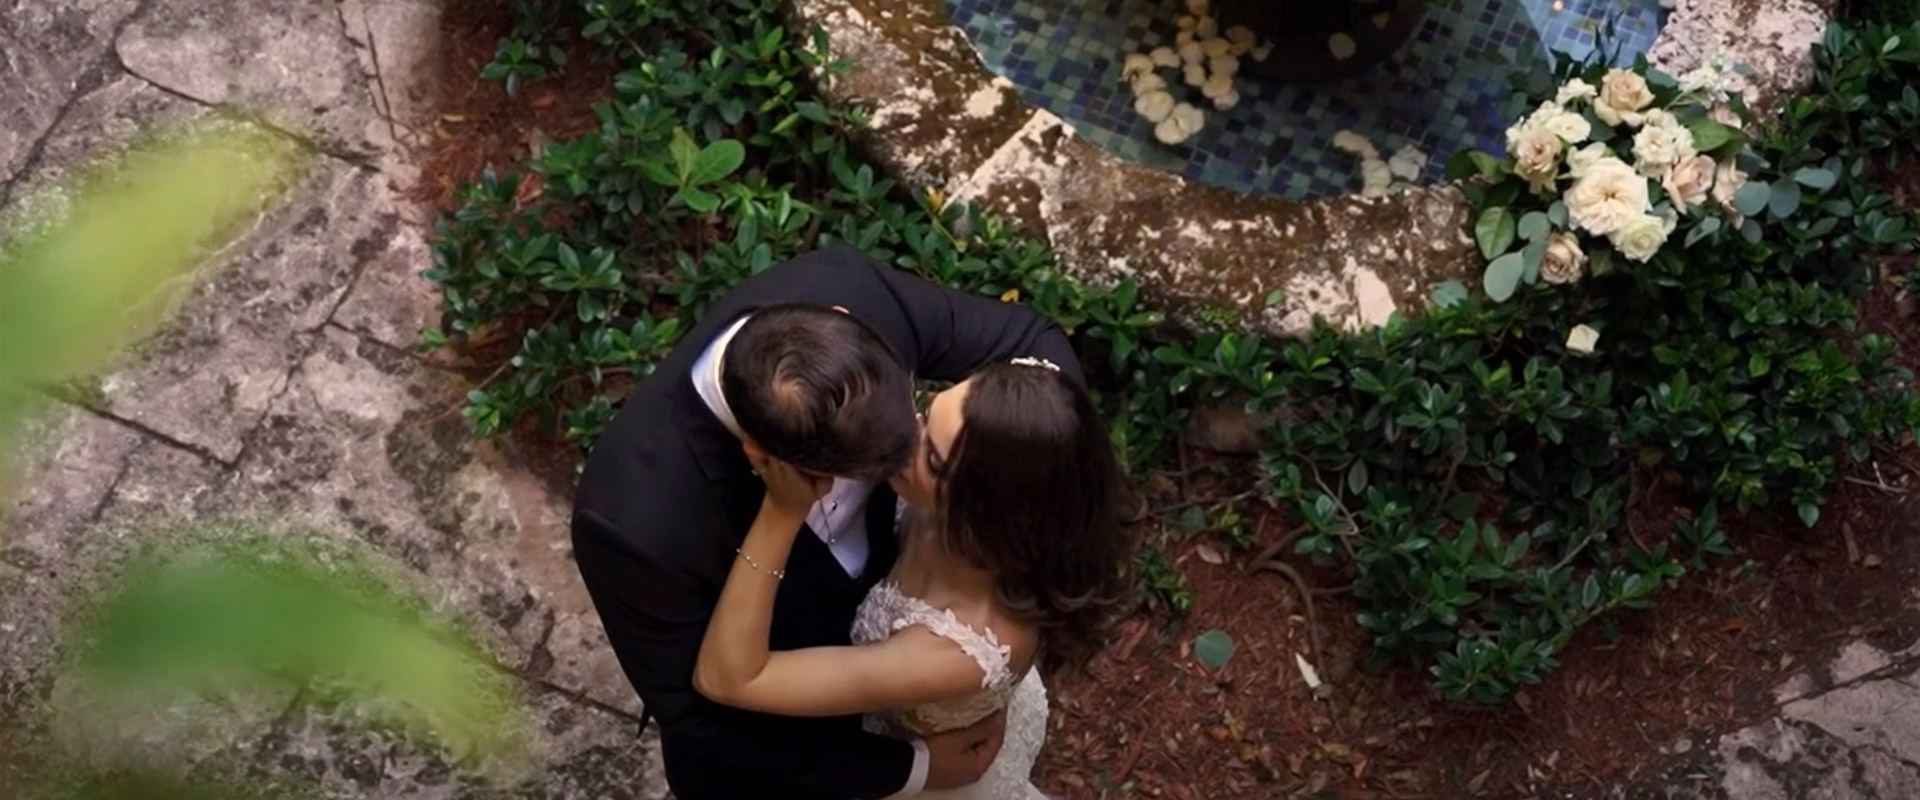 newlyweds kissing in courtyard